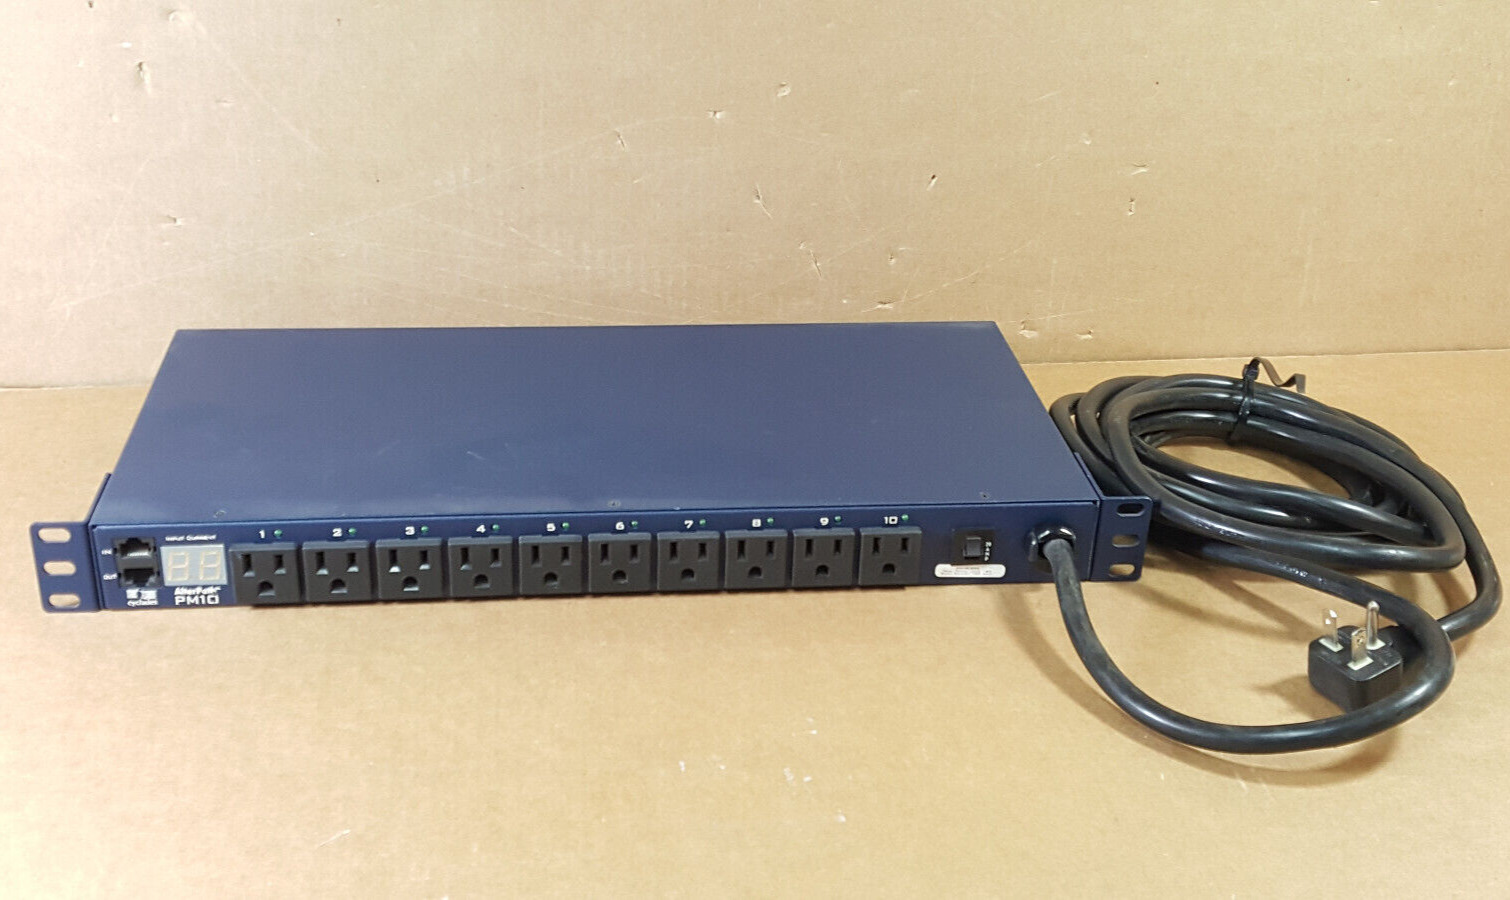 Lot of 3 PM10-20A CYCLADES AVOCENT  20A 10 PORT RACK POWER DISTRIBUTION UNIT